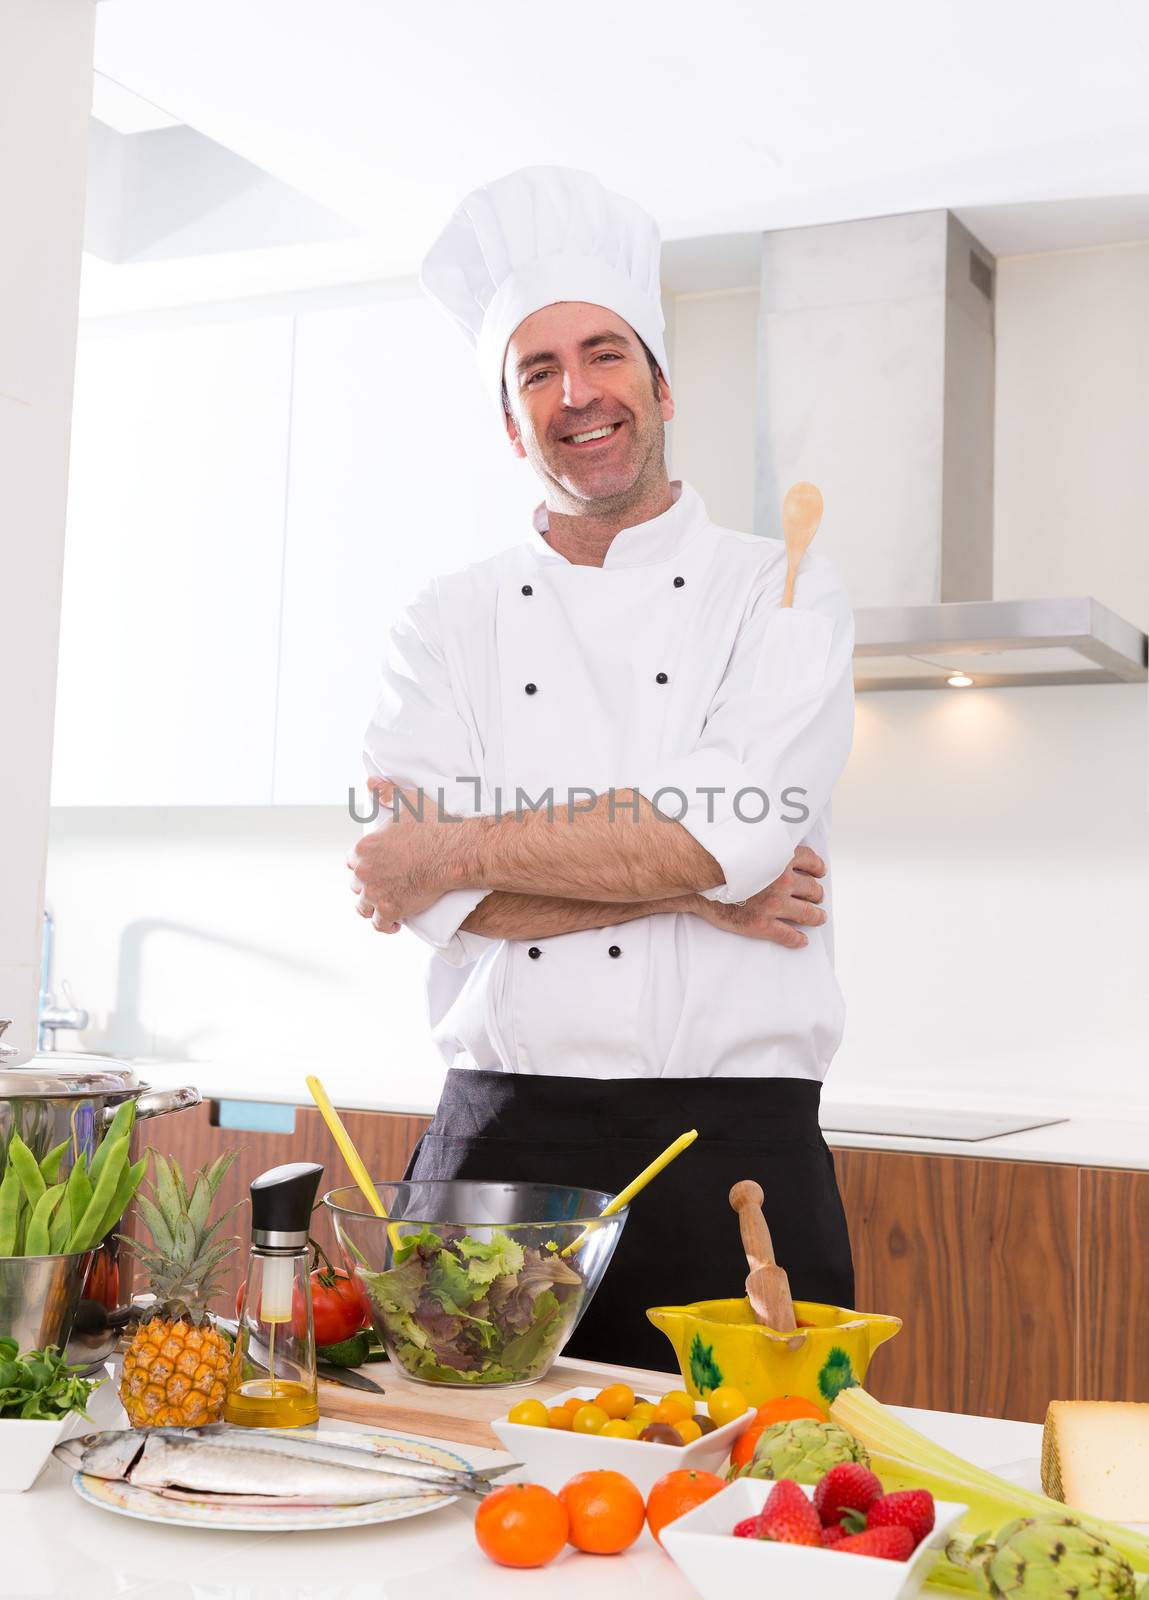 Chef male portrait on white countertop with food at kitchen